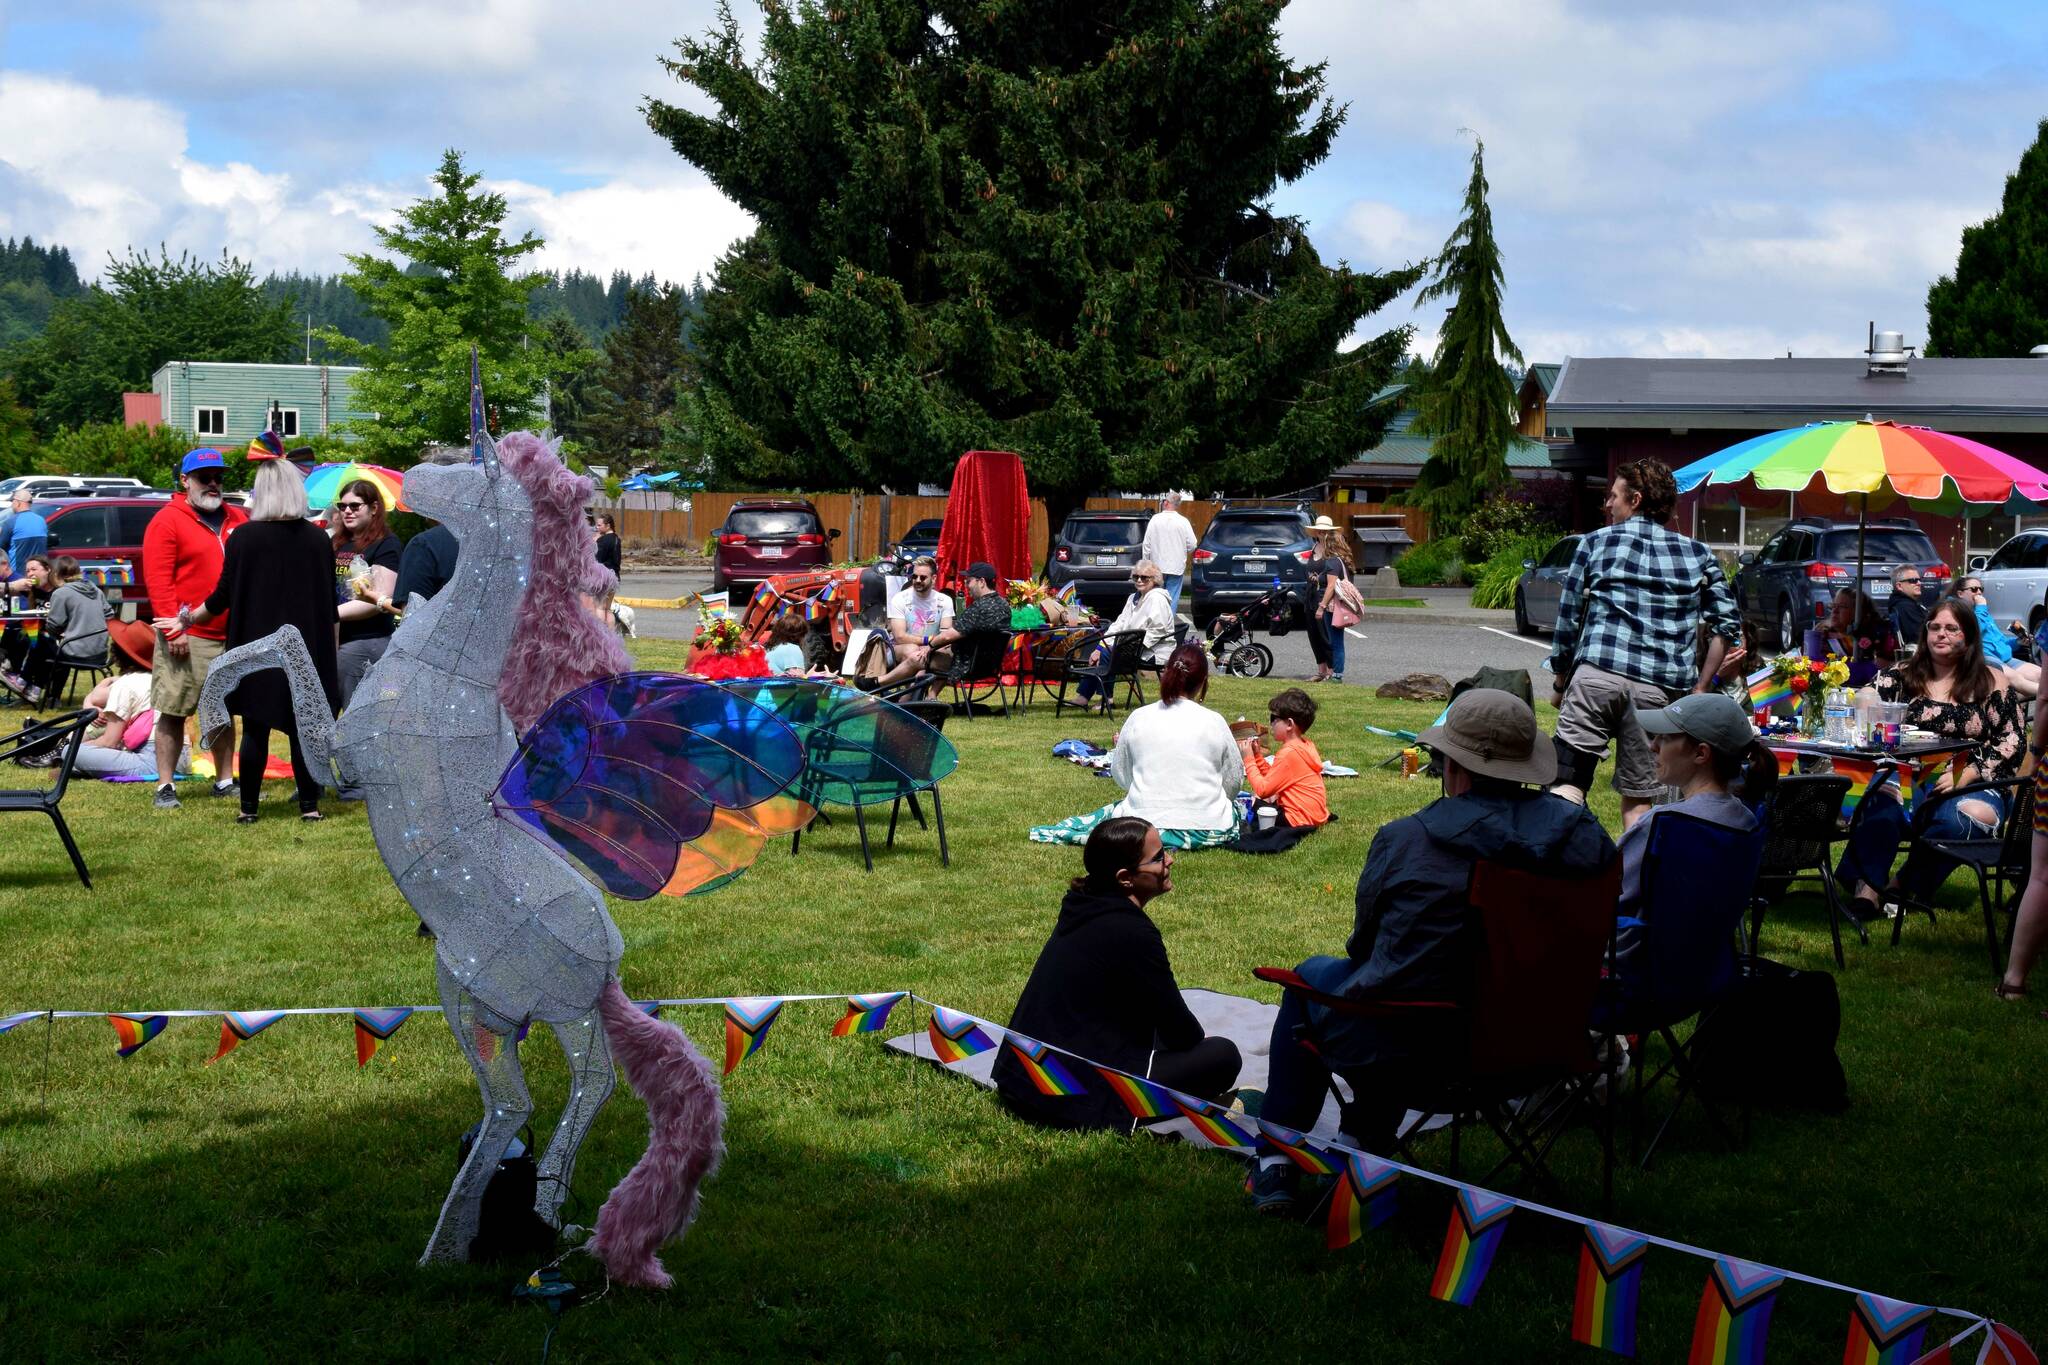 The Carnation Pride Picnic on June 11. Photos by Conor Wilson/Valley Record.